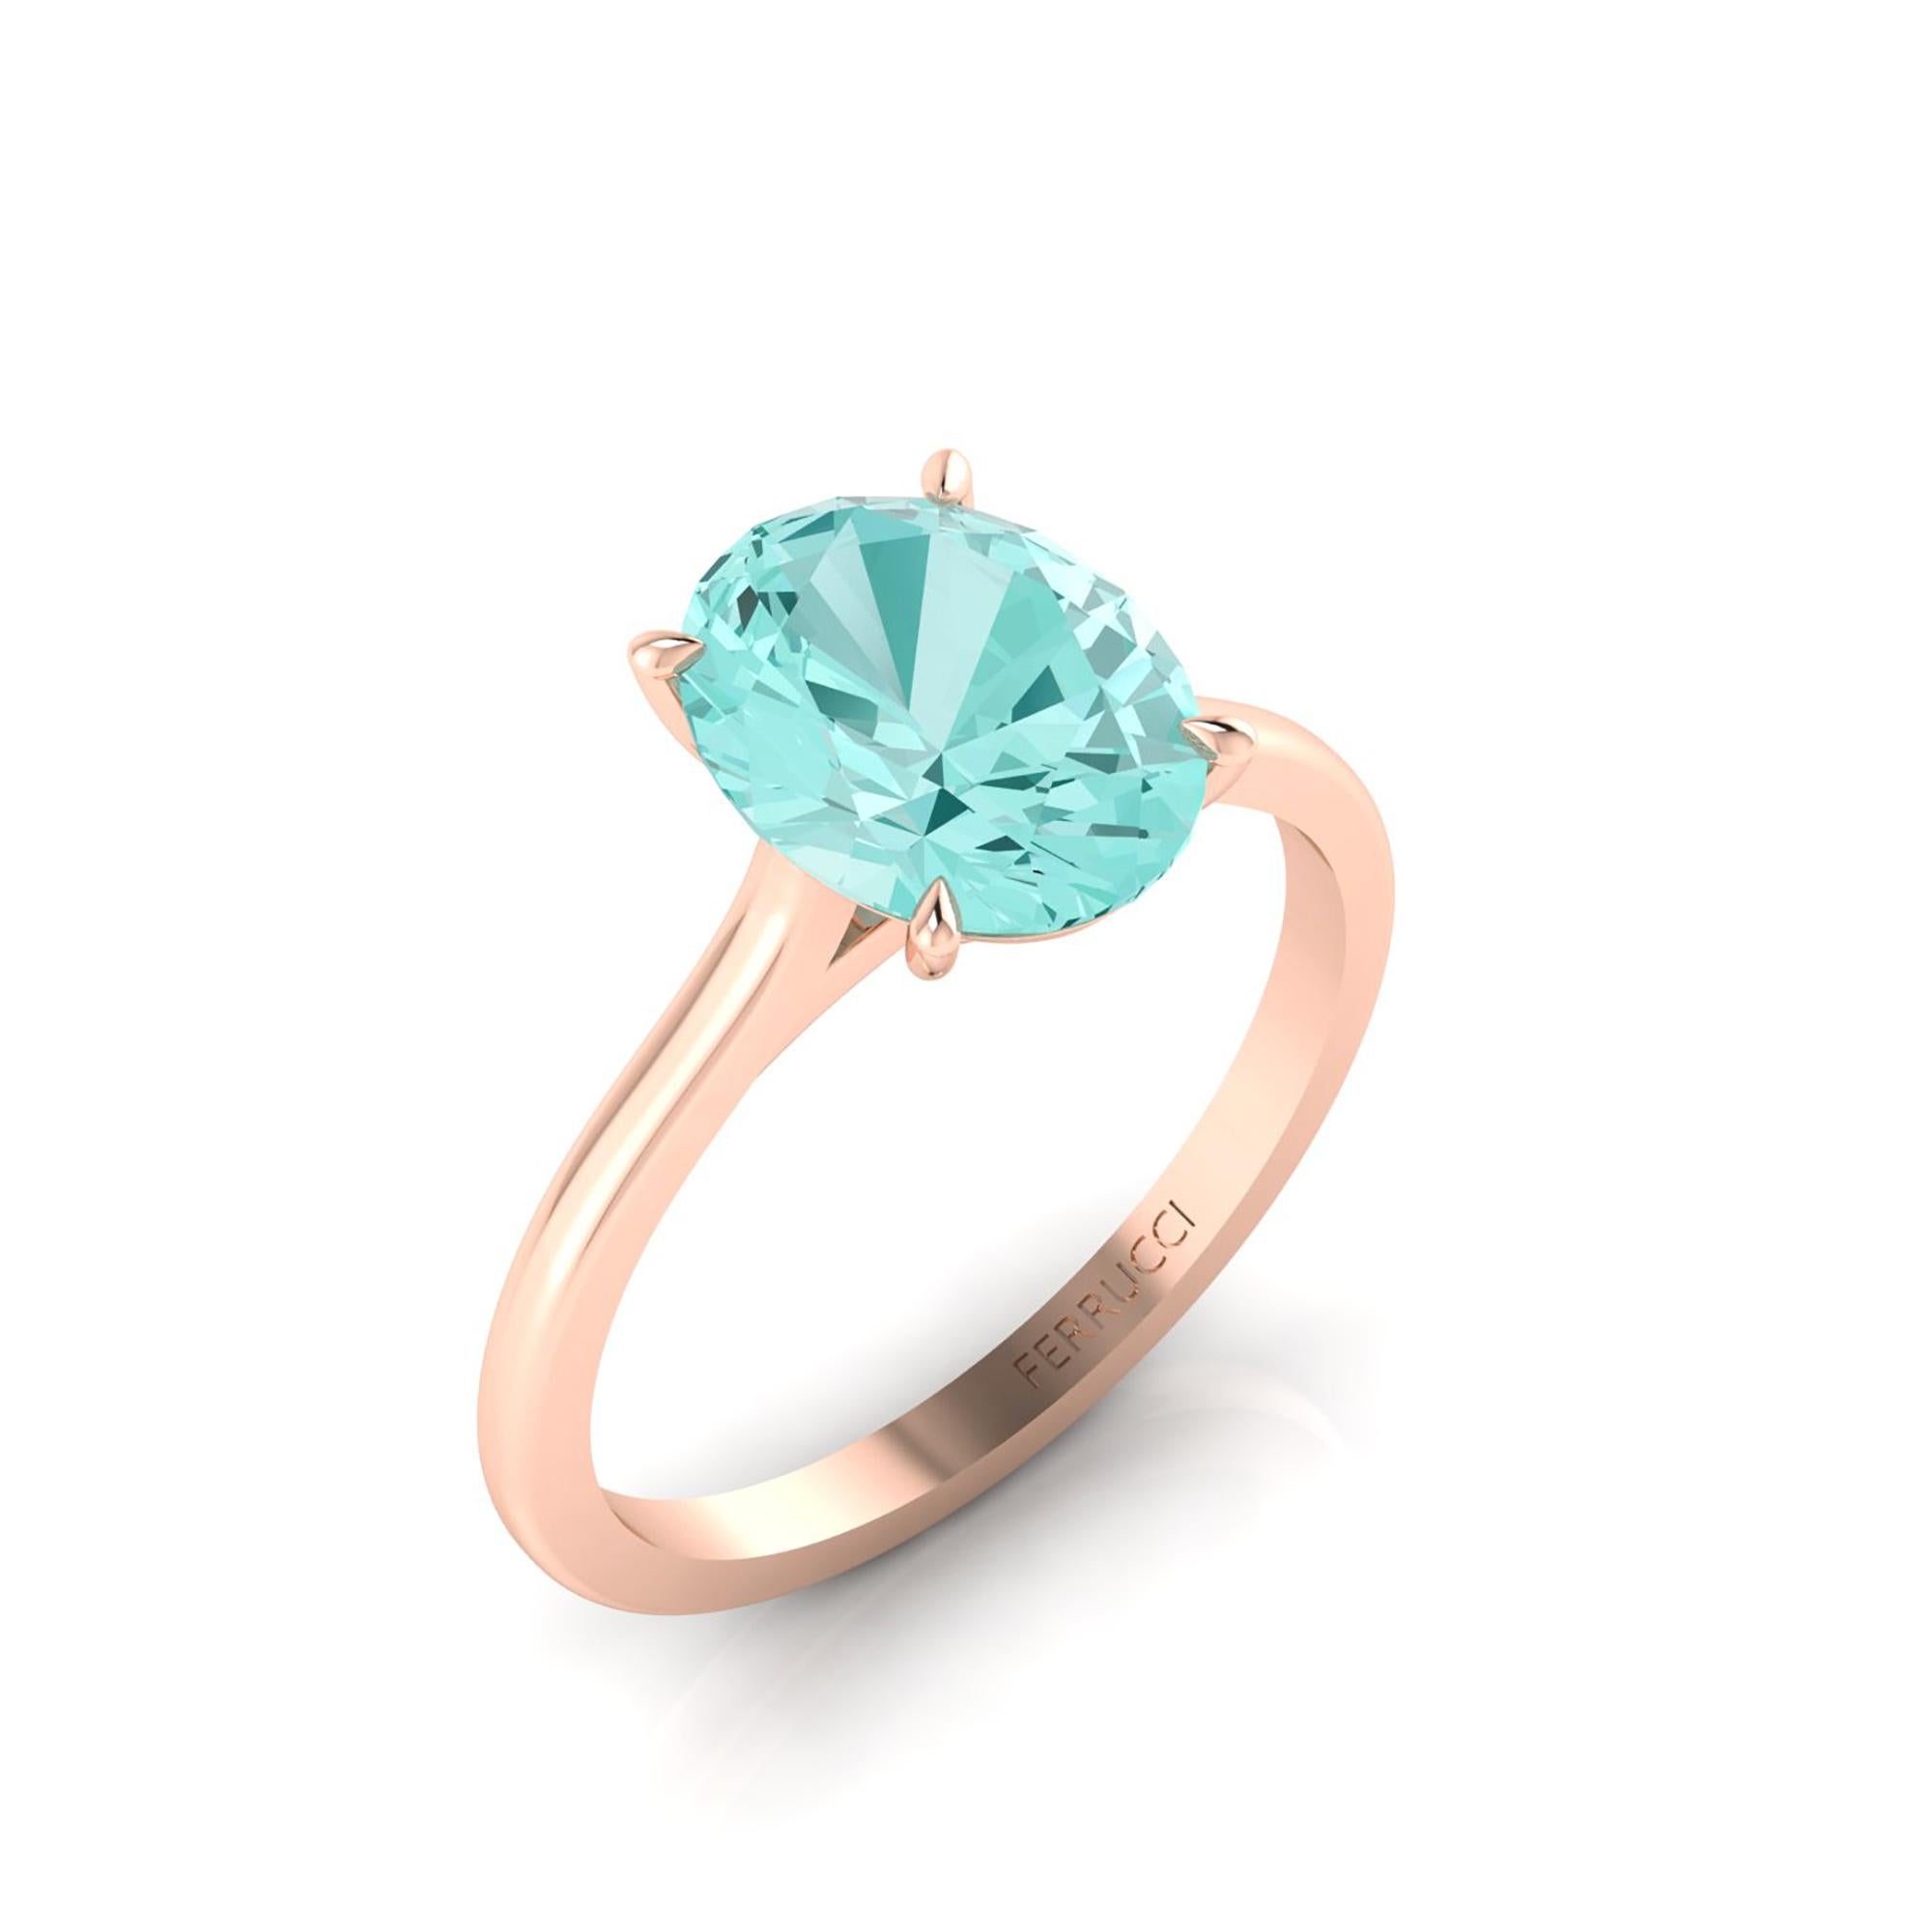 Natural AGL Certified 2.11 carats Oval cut Paraiba tourmaline, in an handcrafted 18k rose gold ring, with the best Italian manufacturing quality.

This ring is a size 6, we offer complimentary sizing to perfection in our in house workshop when a